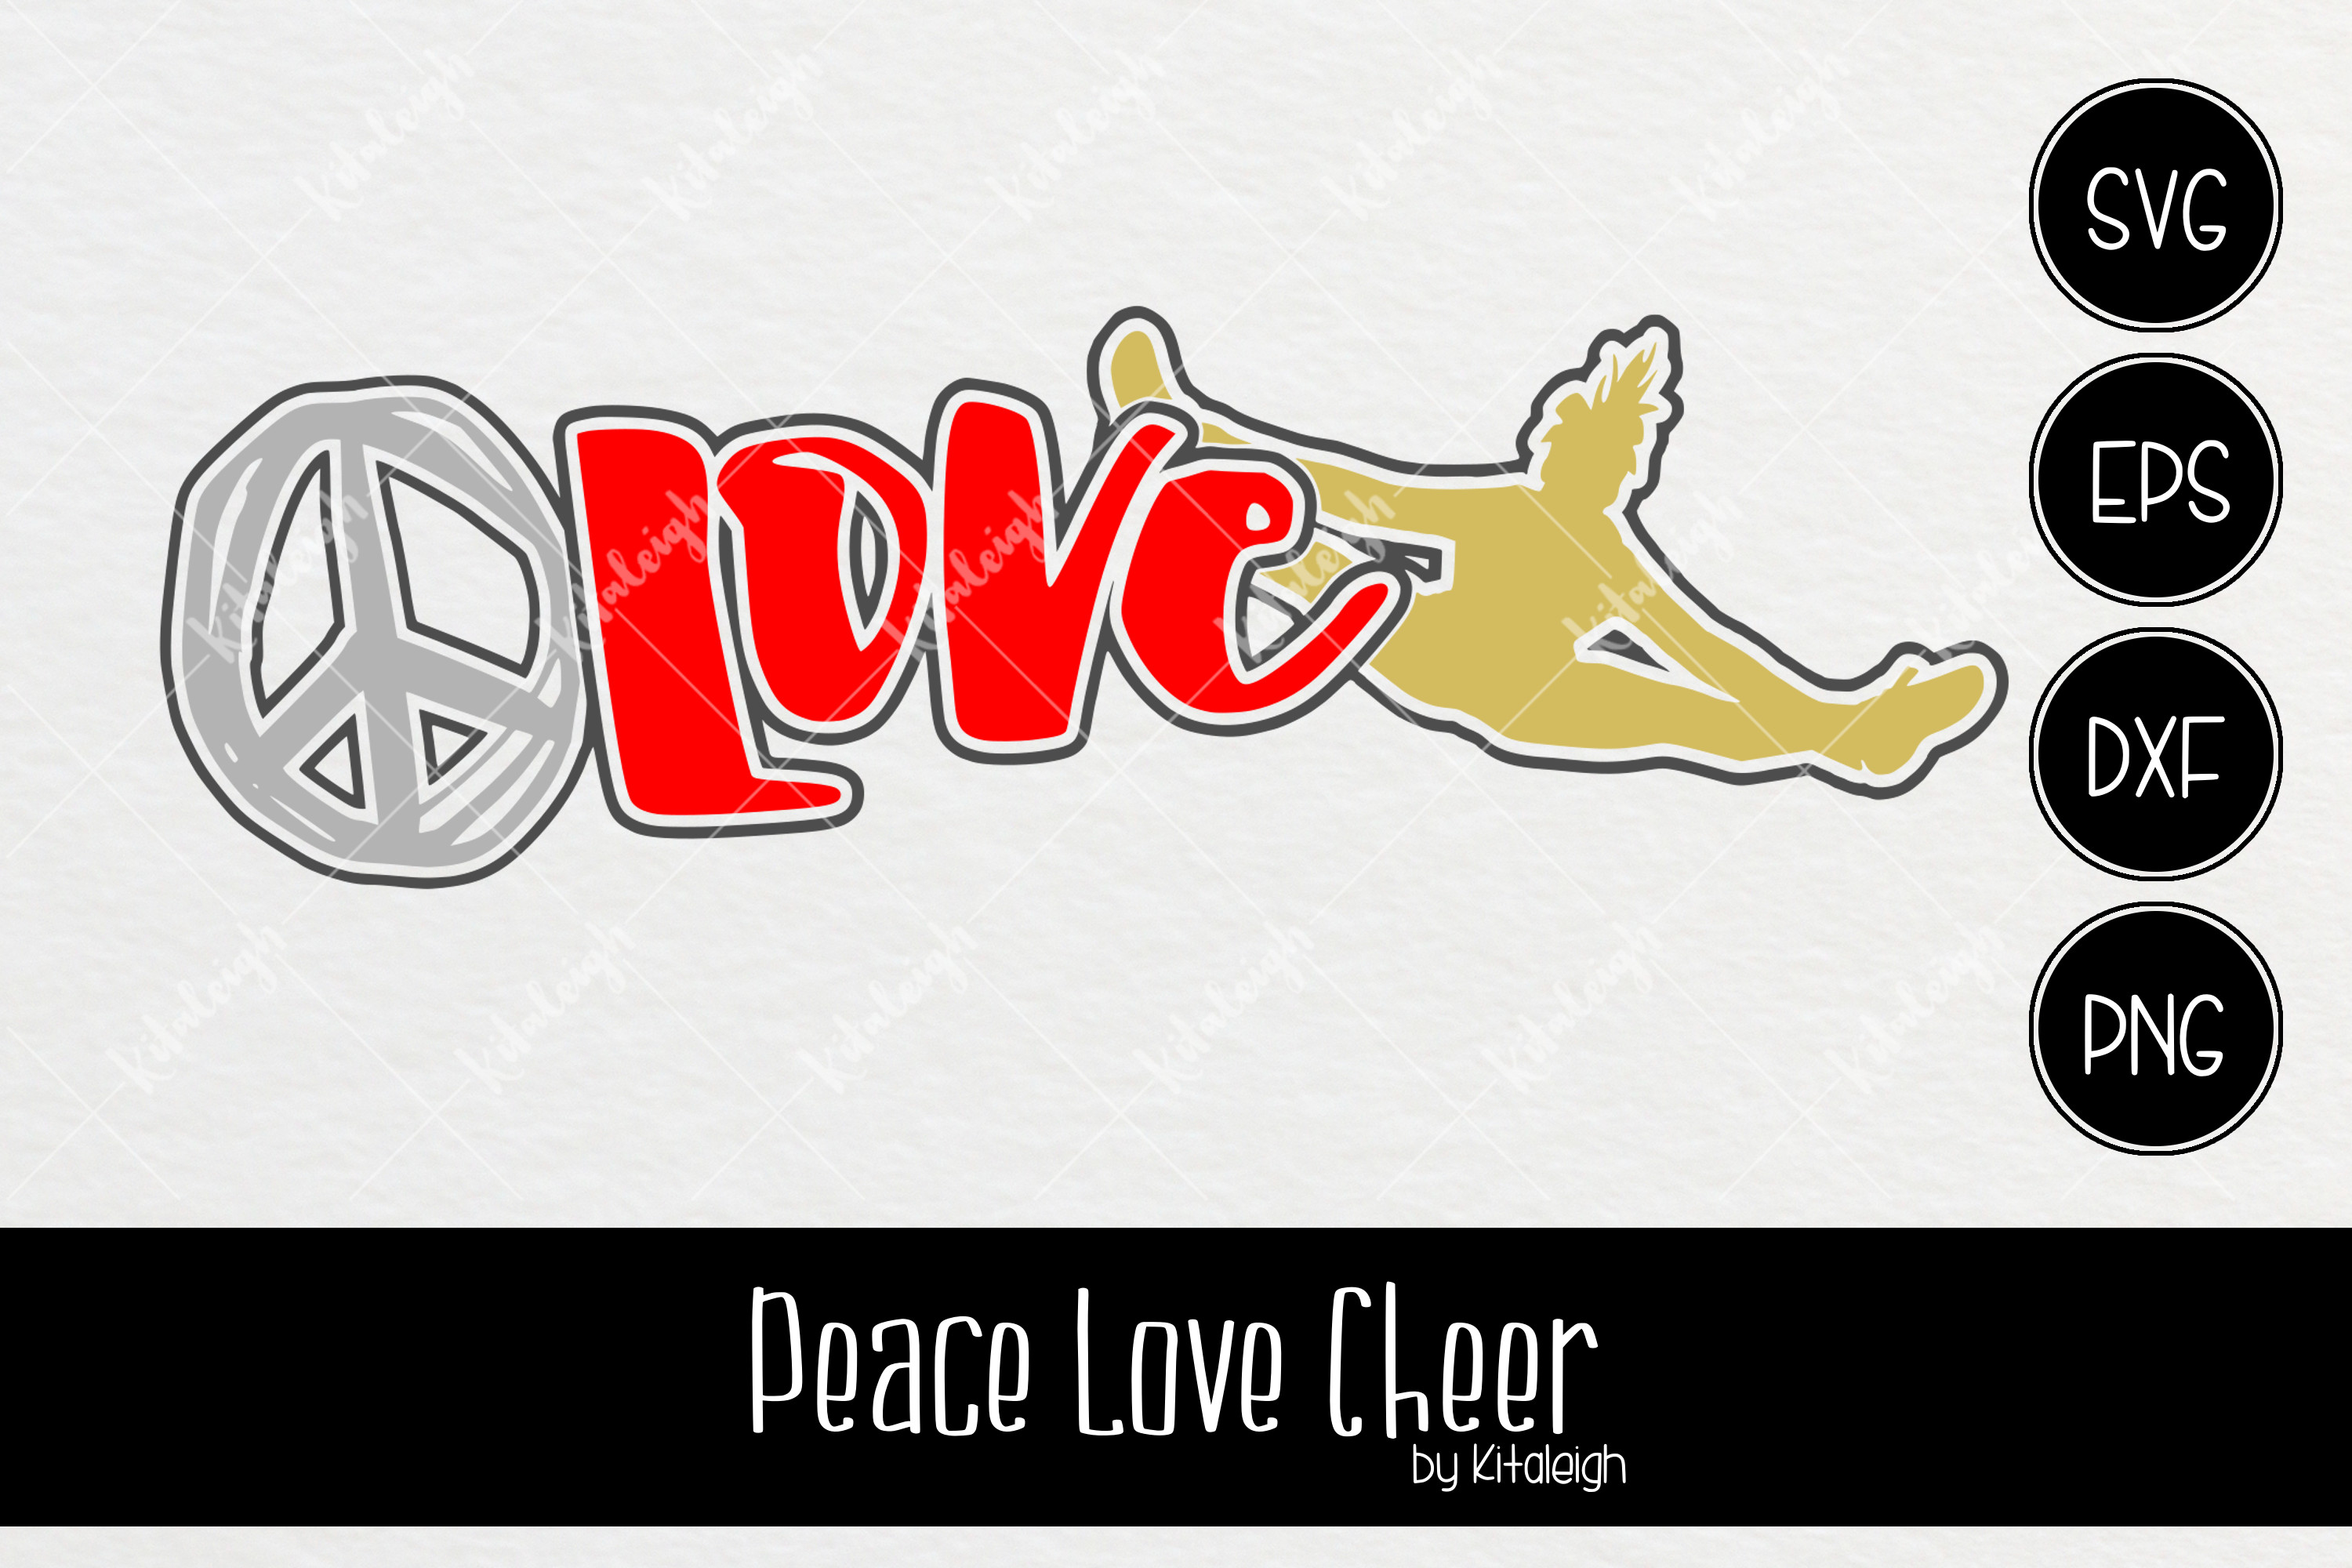 Download Peace Love Cheer